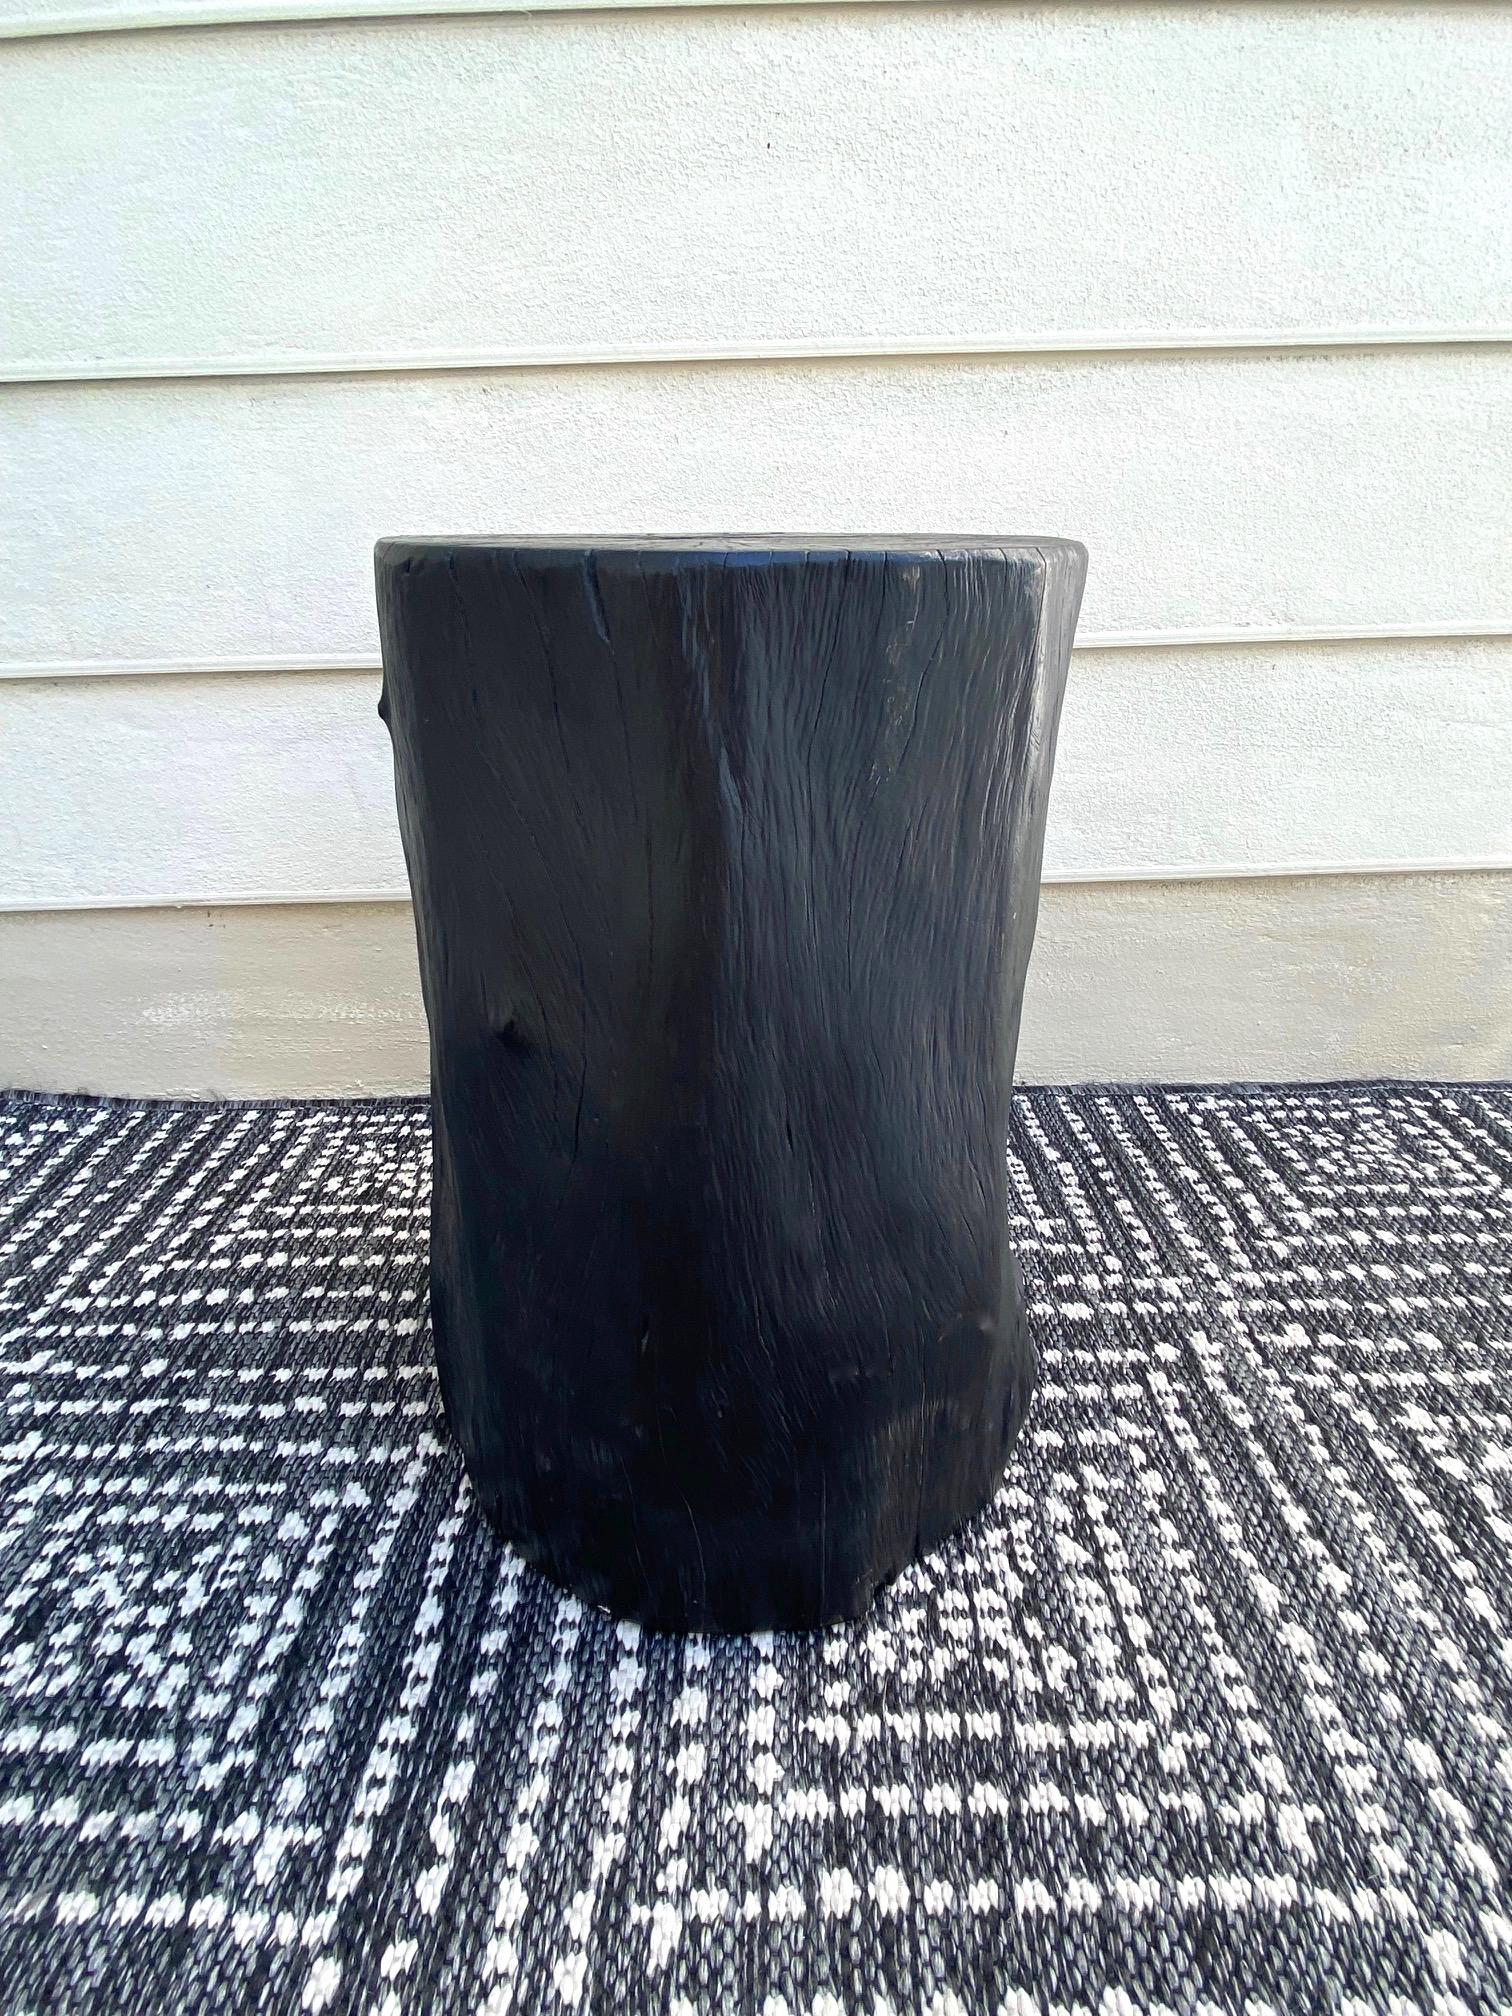 Contemporary Indonesian Burnt and Blackened Teak Wood Side Table Stump